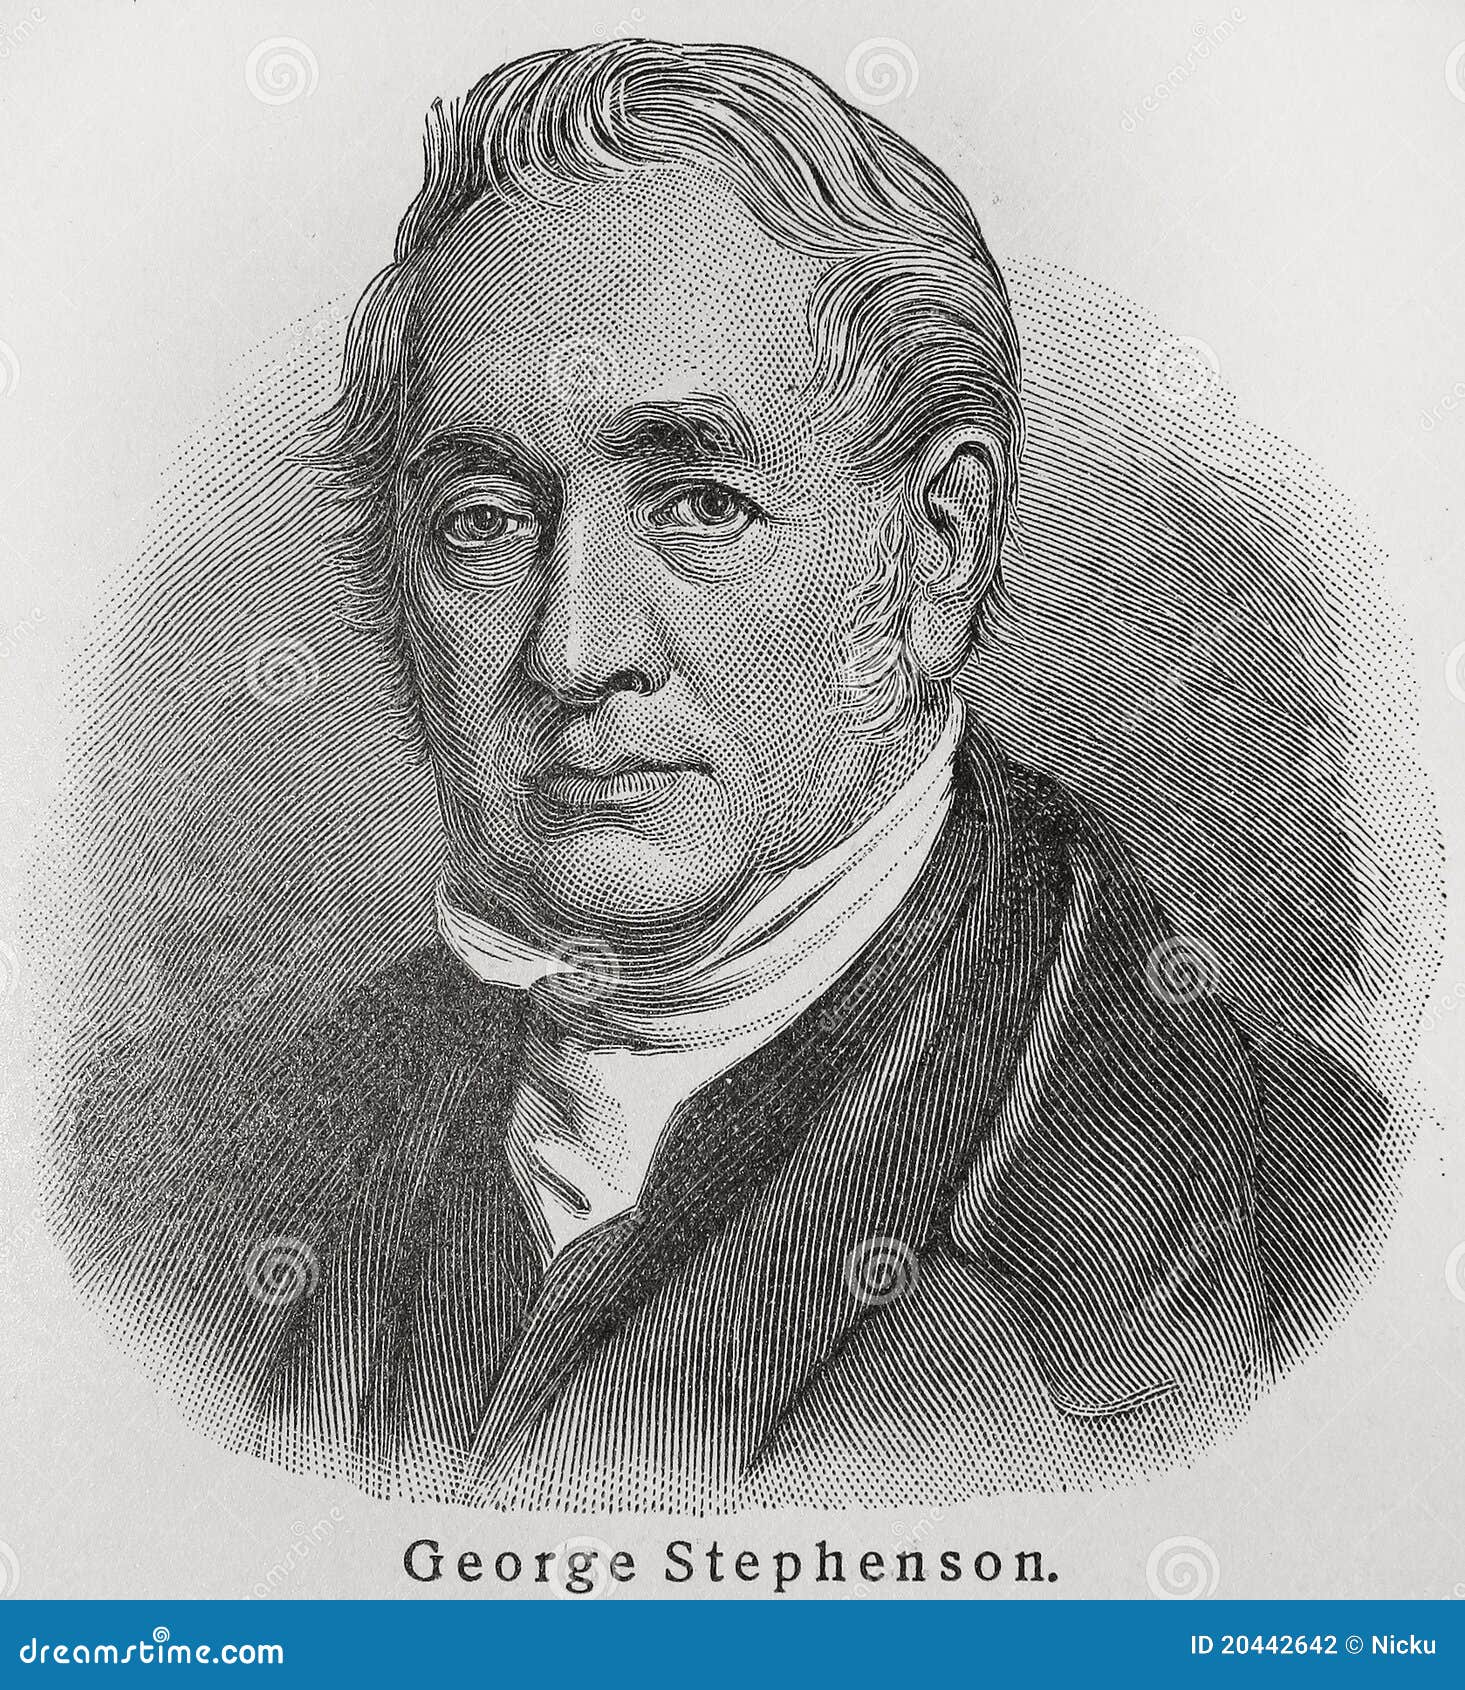 George Stephenson (1781 - 1848) was an English civil engineer and mechanical engineer who built the first public railway line in the world to use steam ... - george-stephenson-20442642